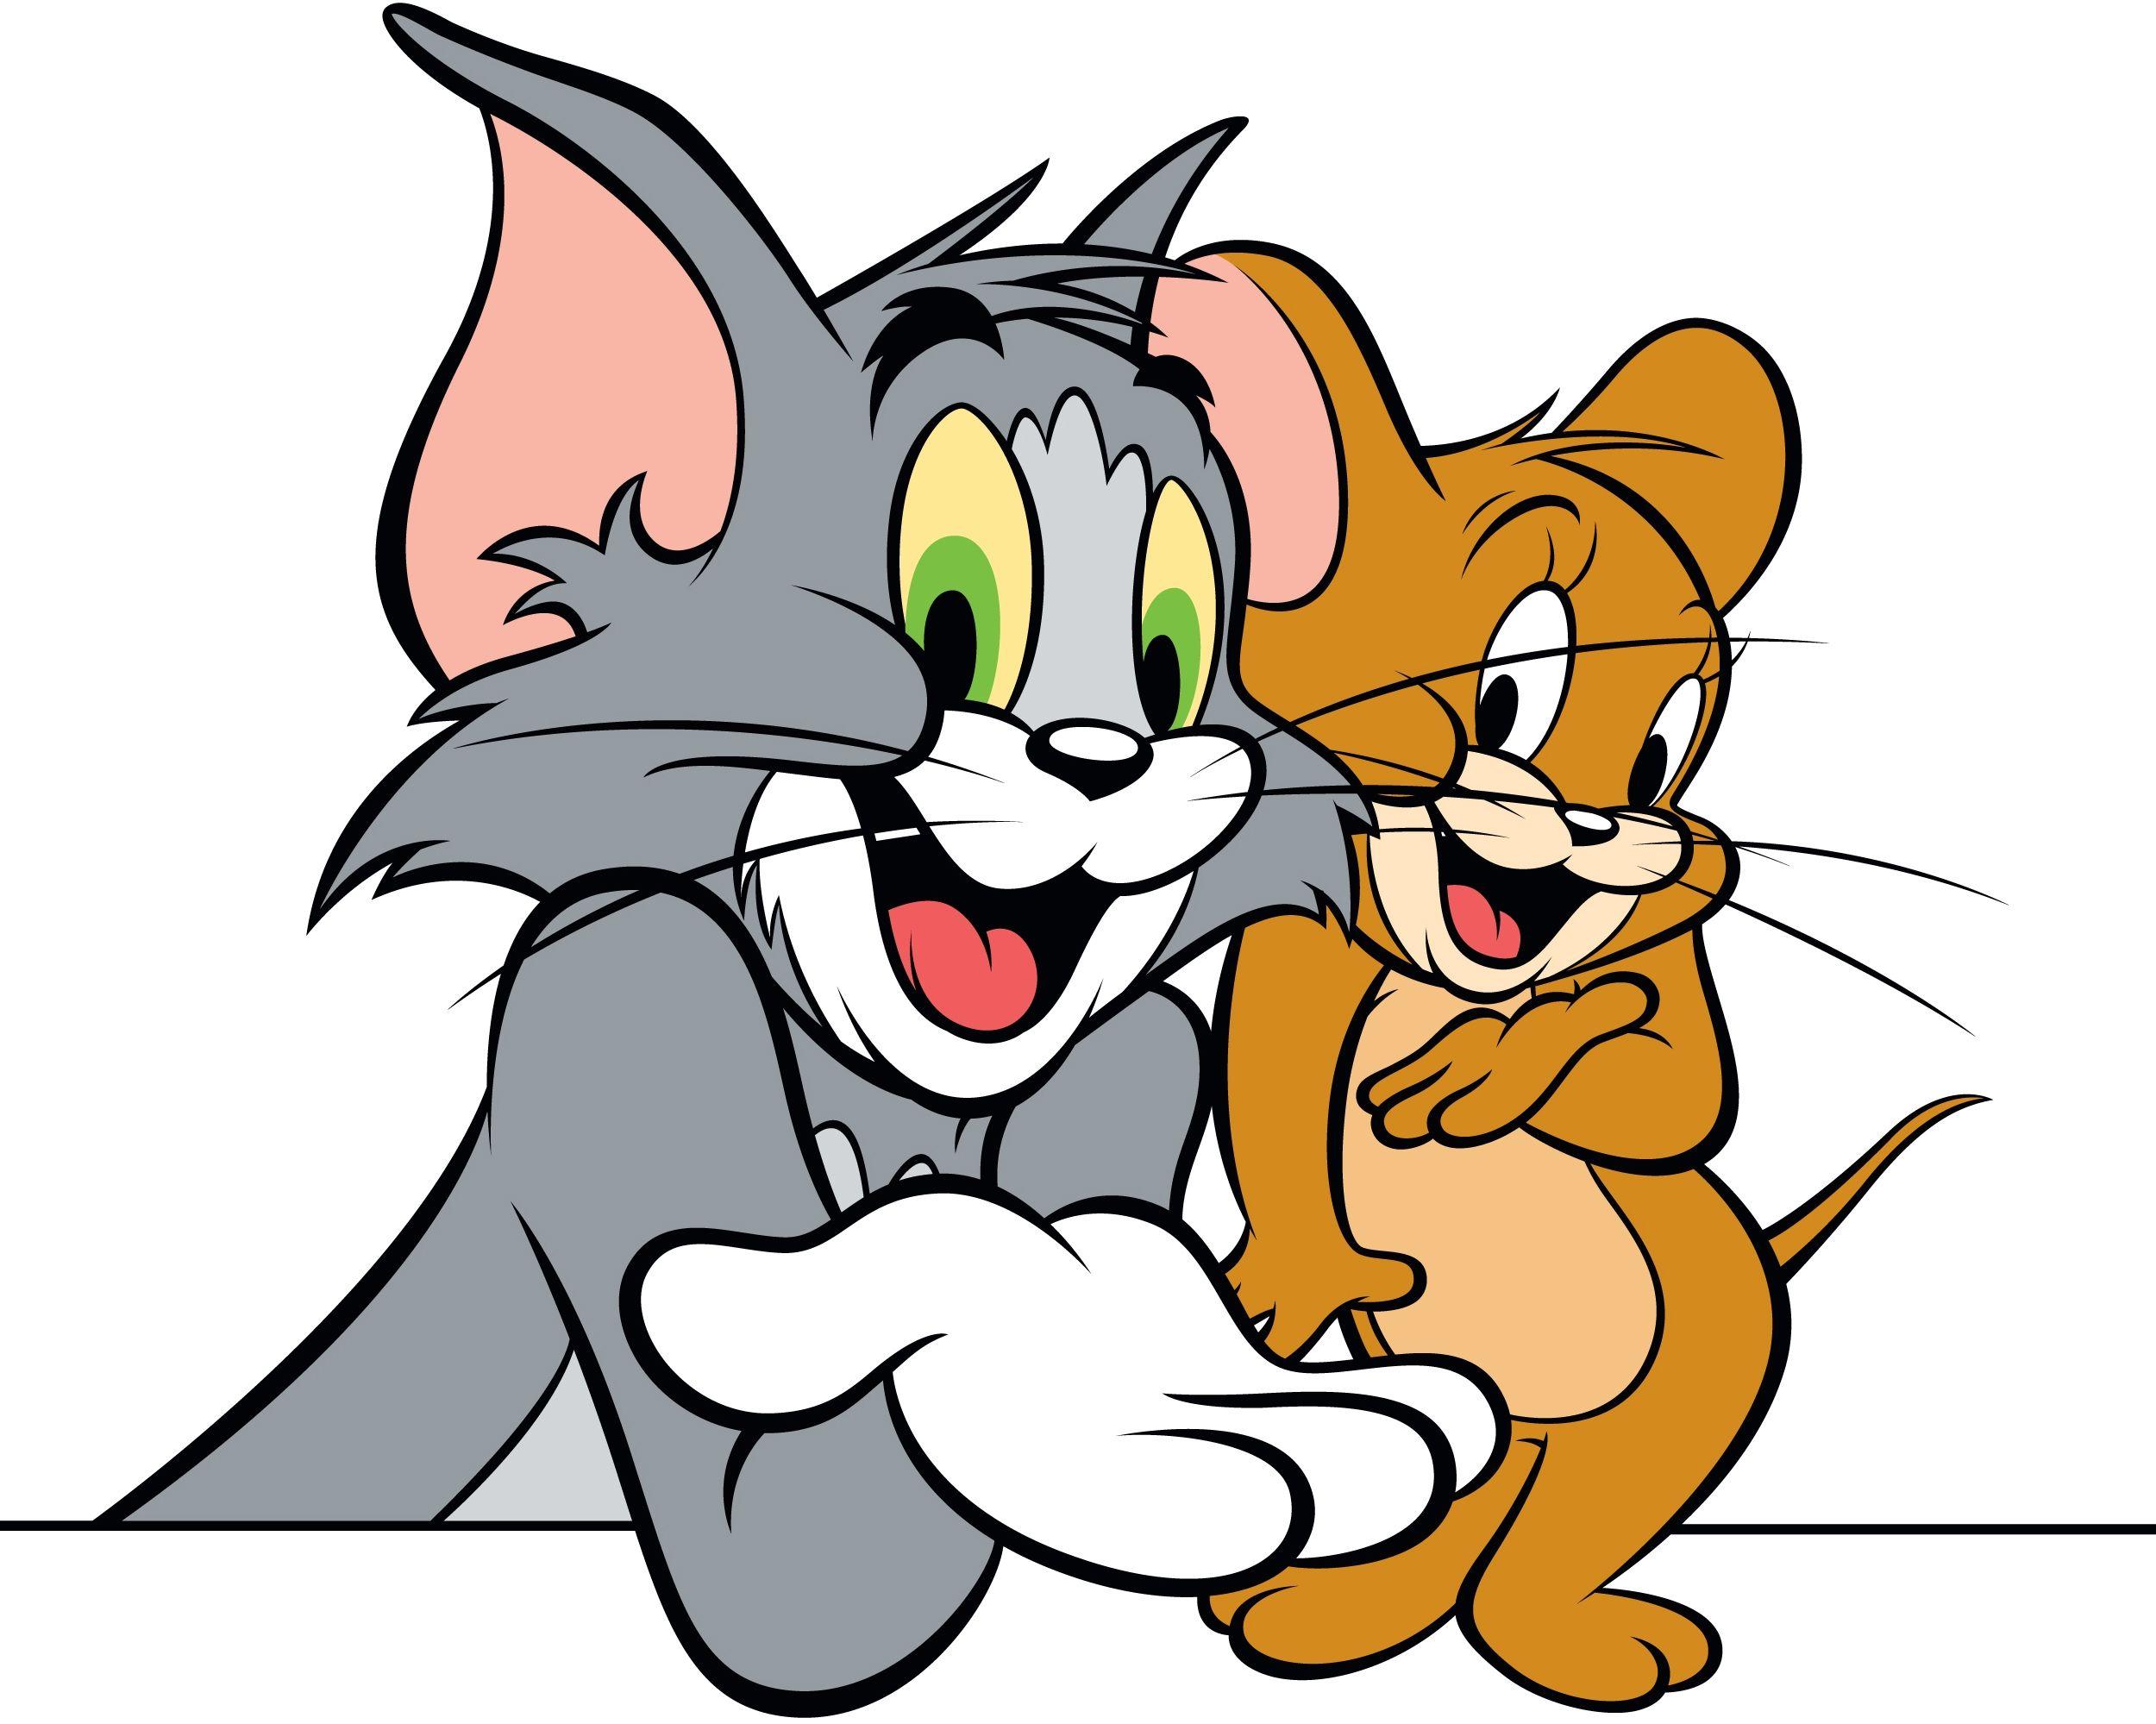 Always together forever whatever may b happens. Tom and jerry wallpaper, Tom and jerry cartoon, Tom and jerry picture